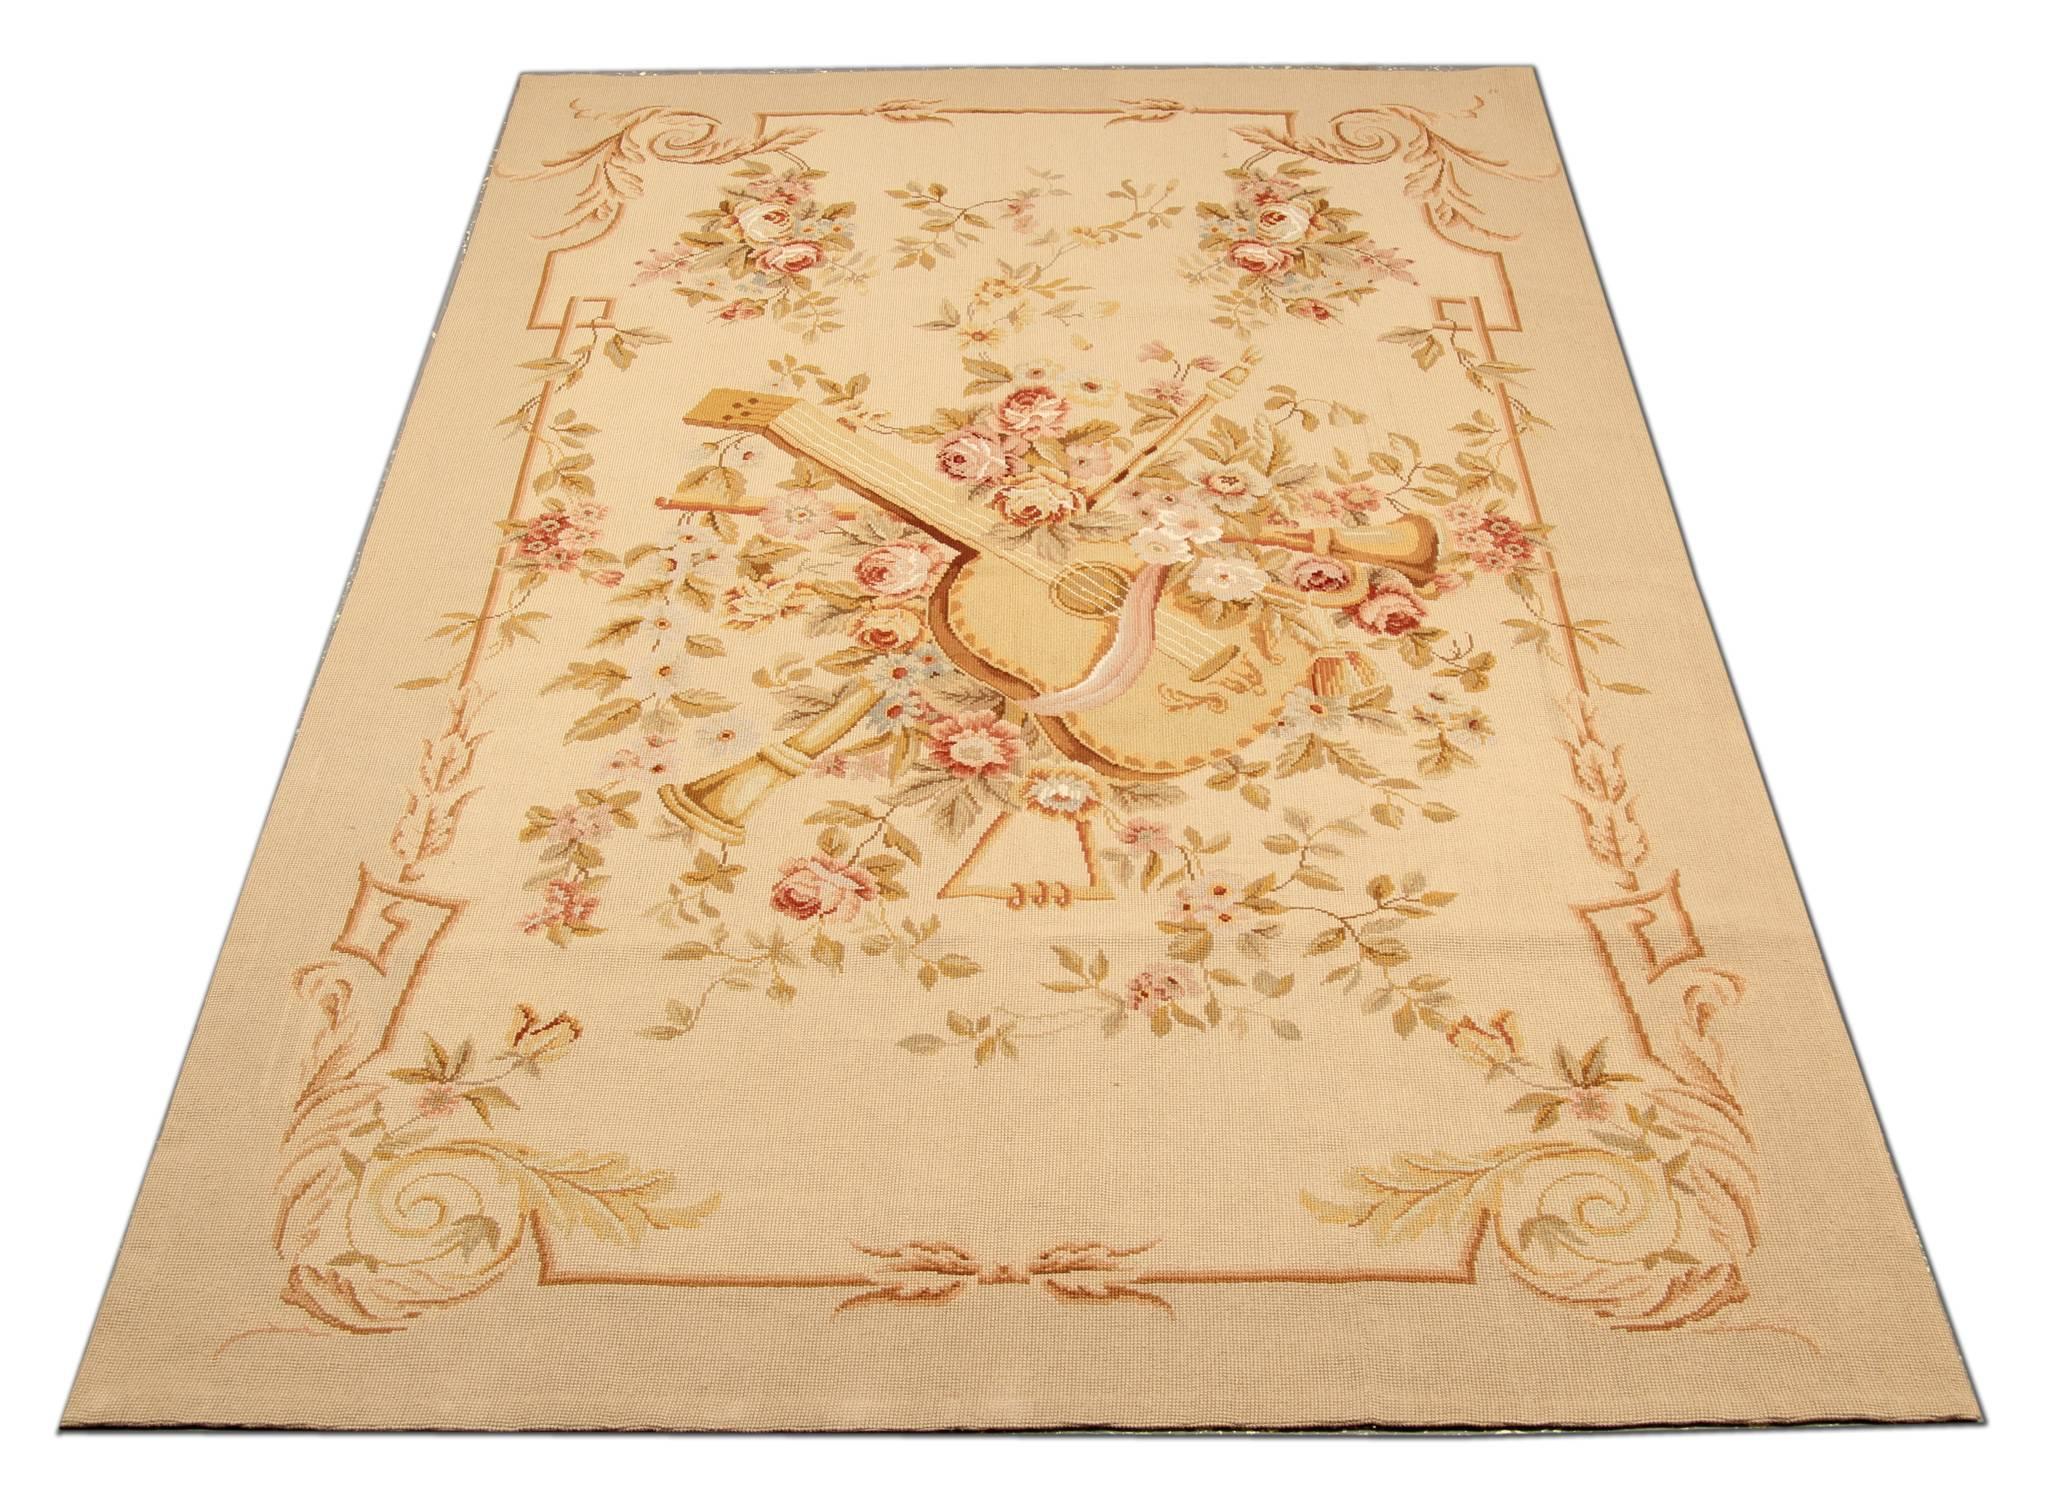 This elegant Aubusson carpet is a resplendent example of the lush architectural style and romantic botanical motifs that captivated European aristocracy for centuries. The softly colored field has a luxurious aura heightened by the delicate color